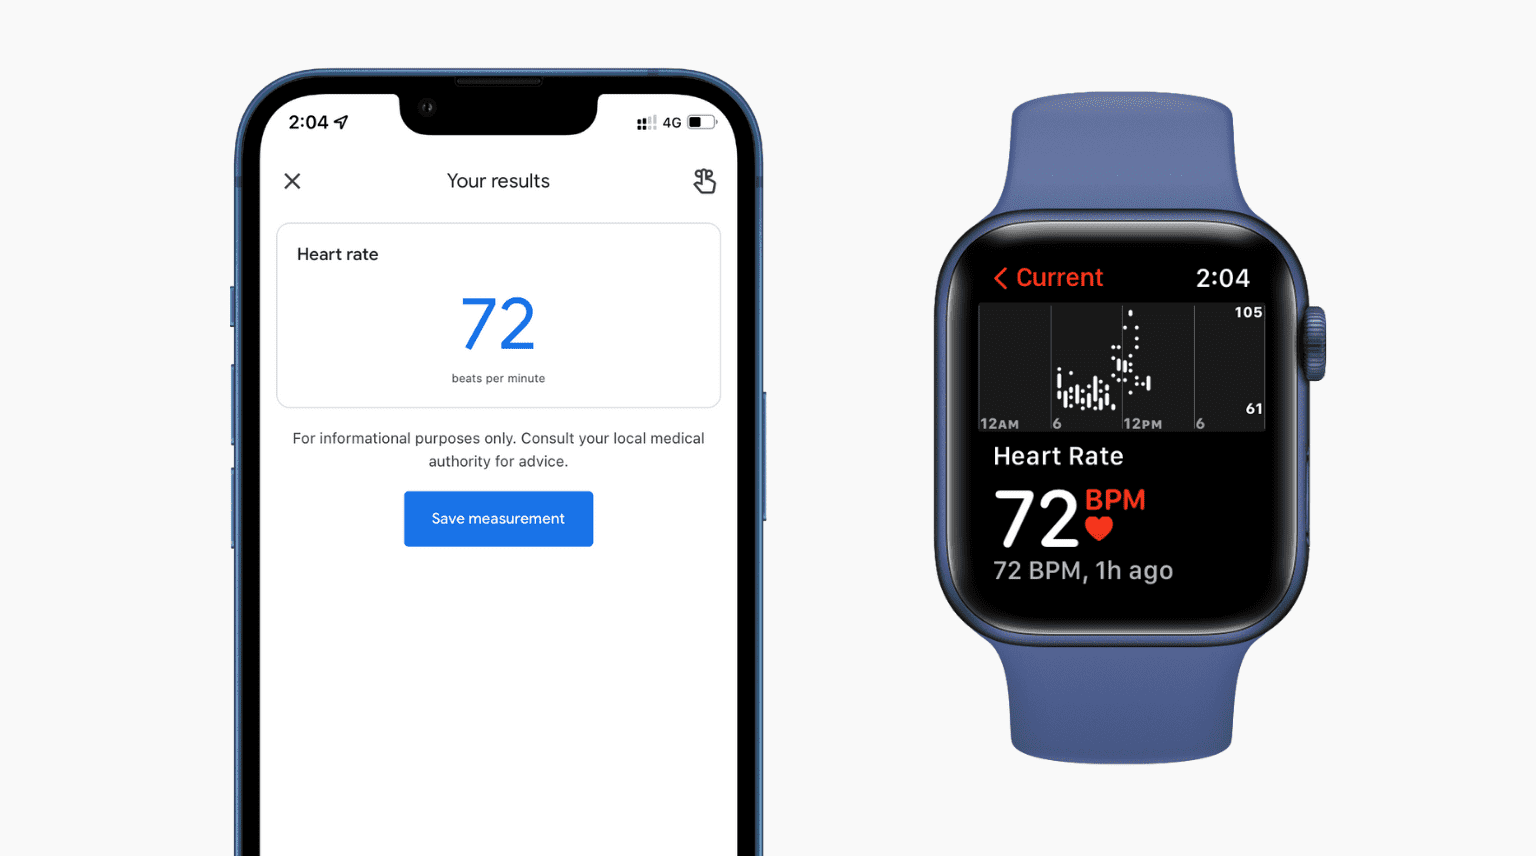 Heart-rate-from-Google-Fit-and-Apple-Watch-2.04-PM